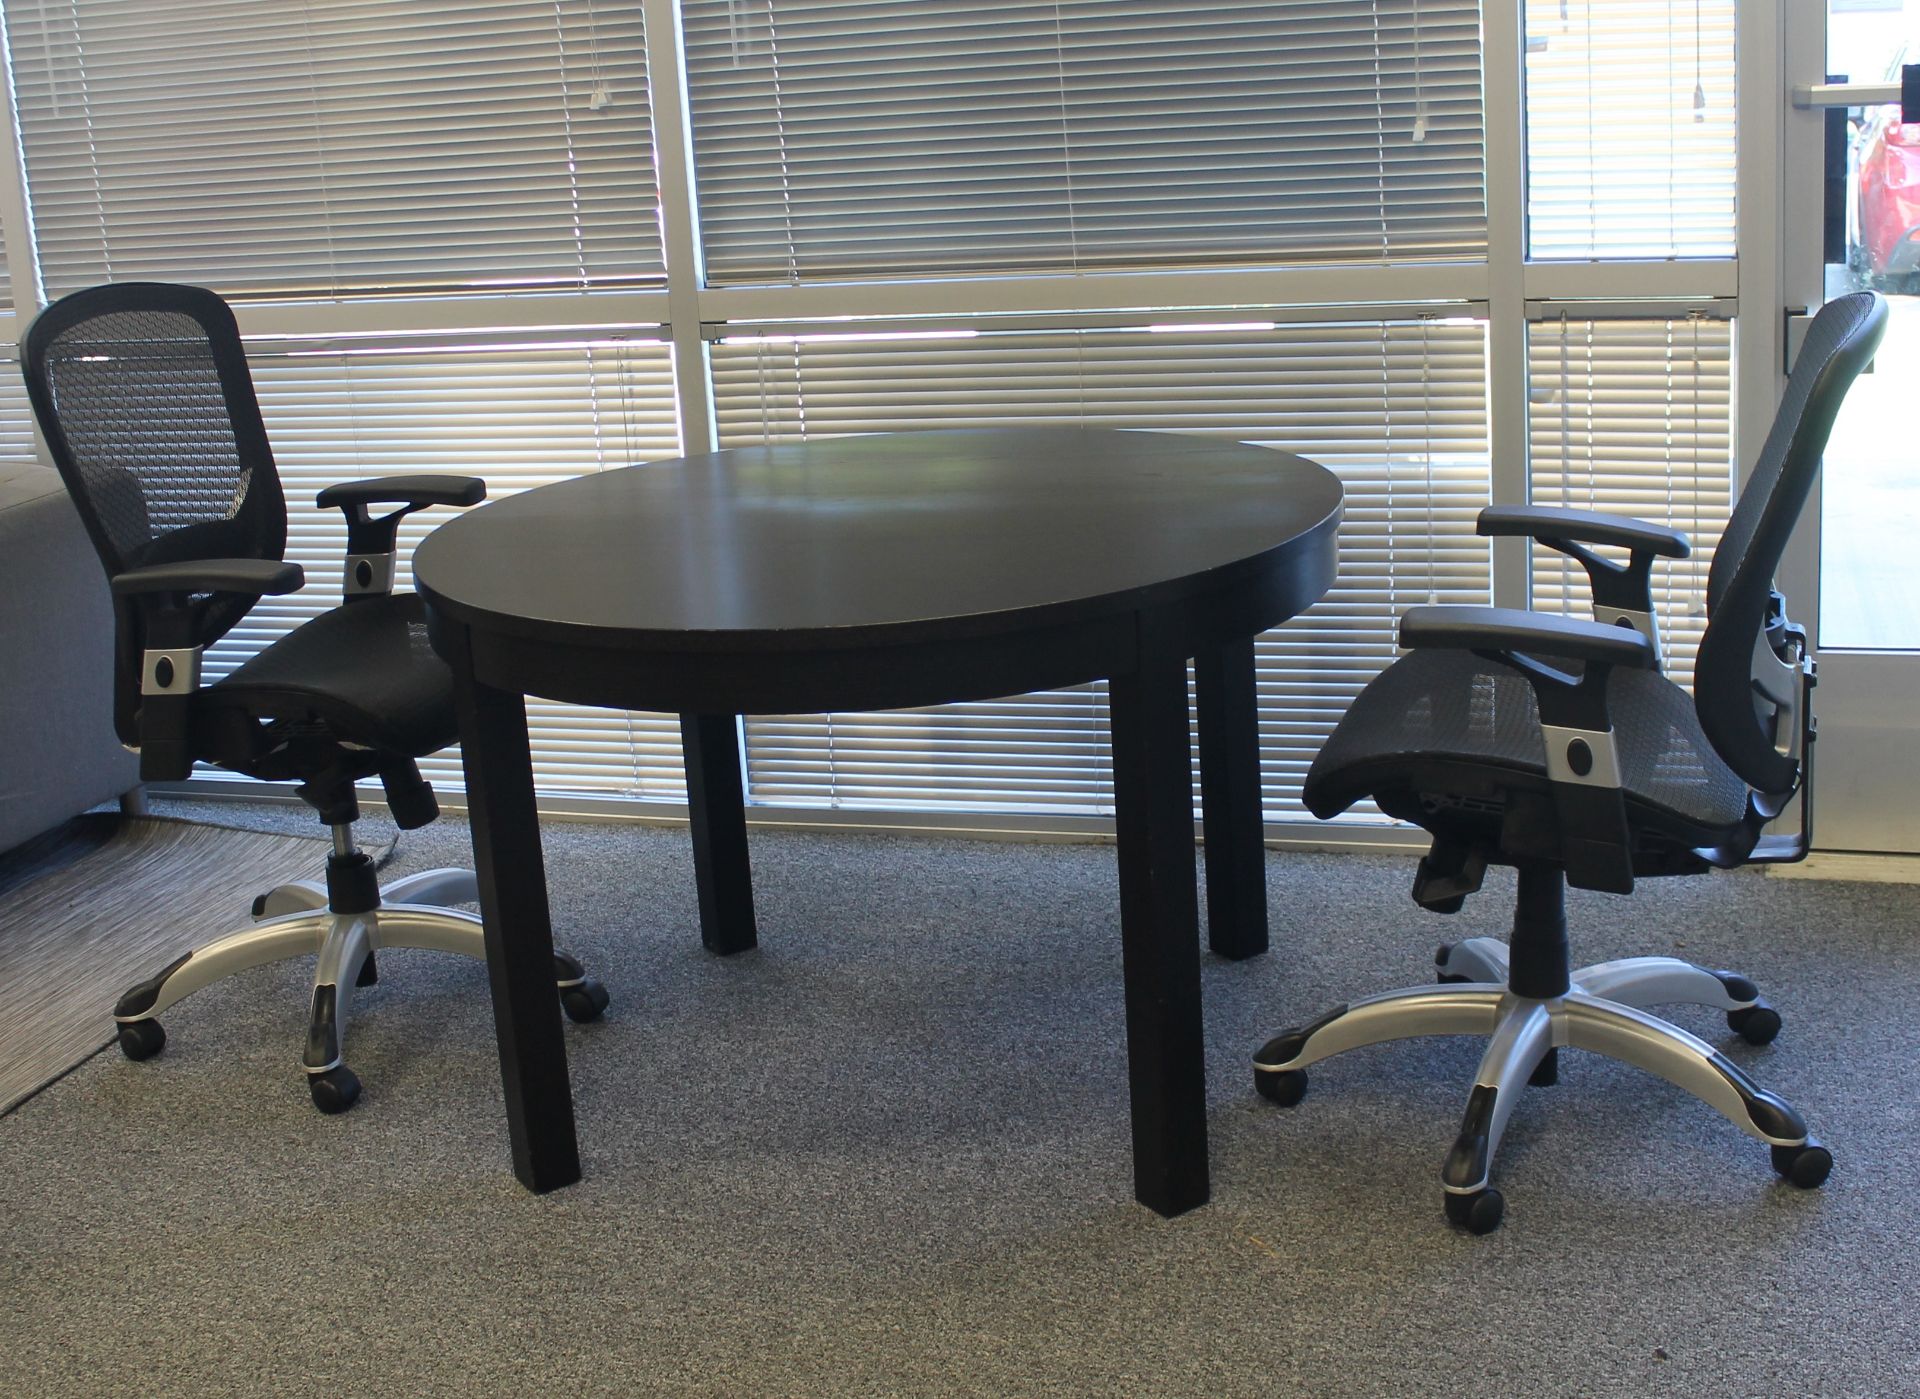 CONFERENCE ROUND TABLE WITH 2 CHAIRS - Image 2 of 4